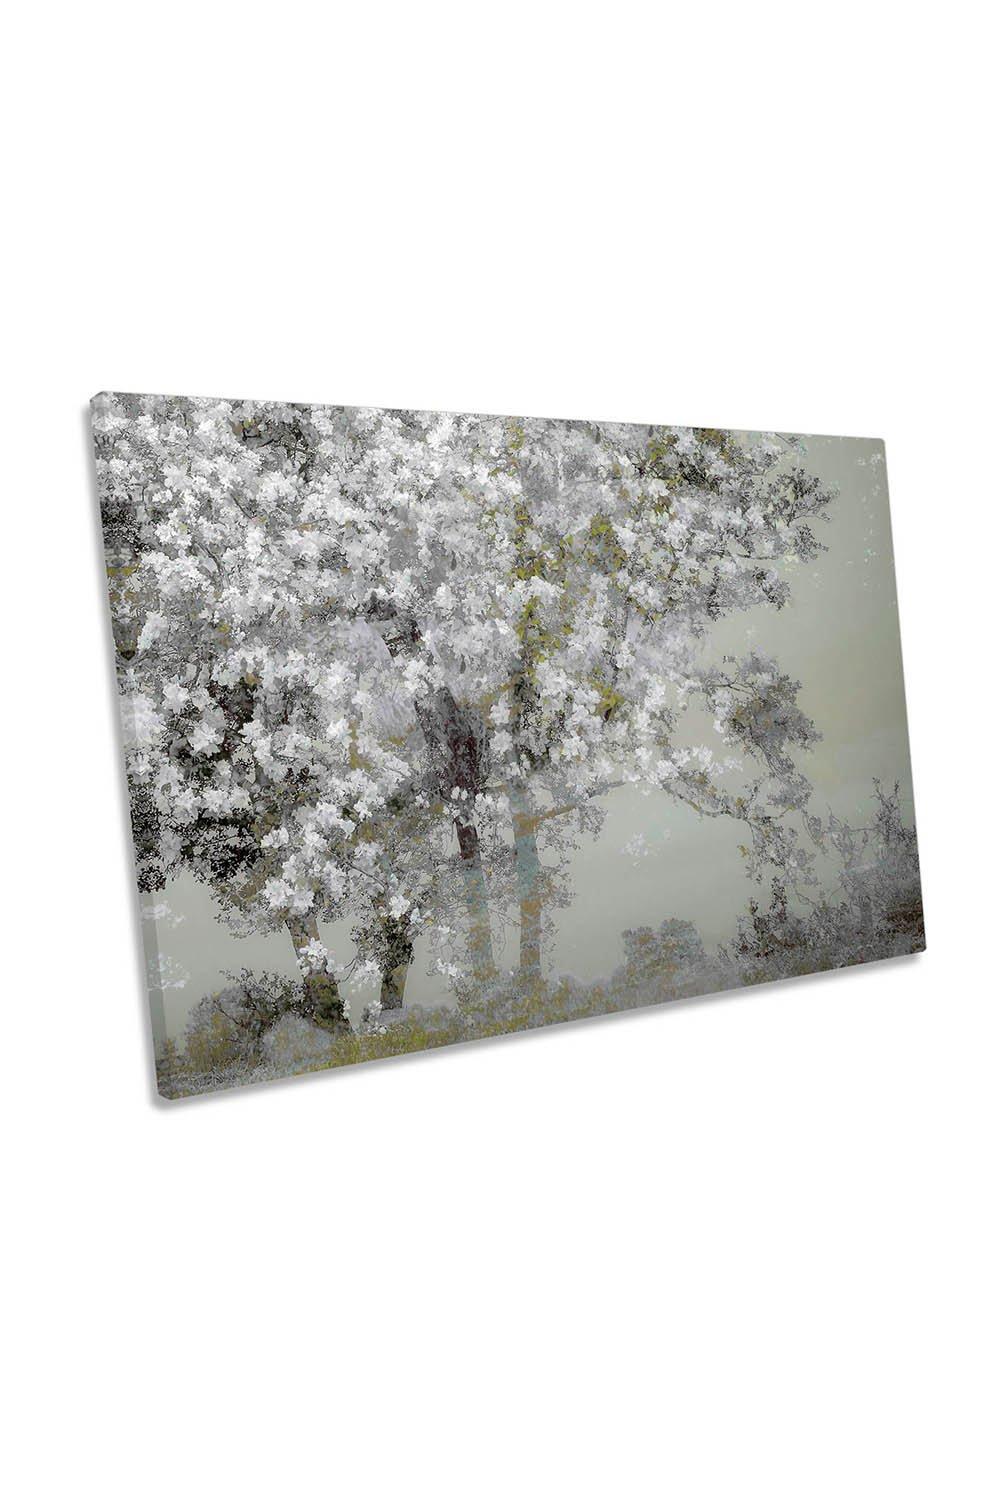 Spring Blossom Floral Abstract Modern Canvas Wall Art Picture Print